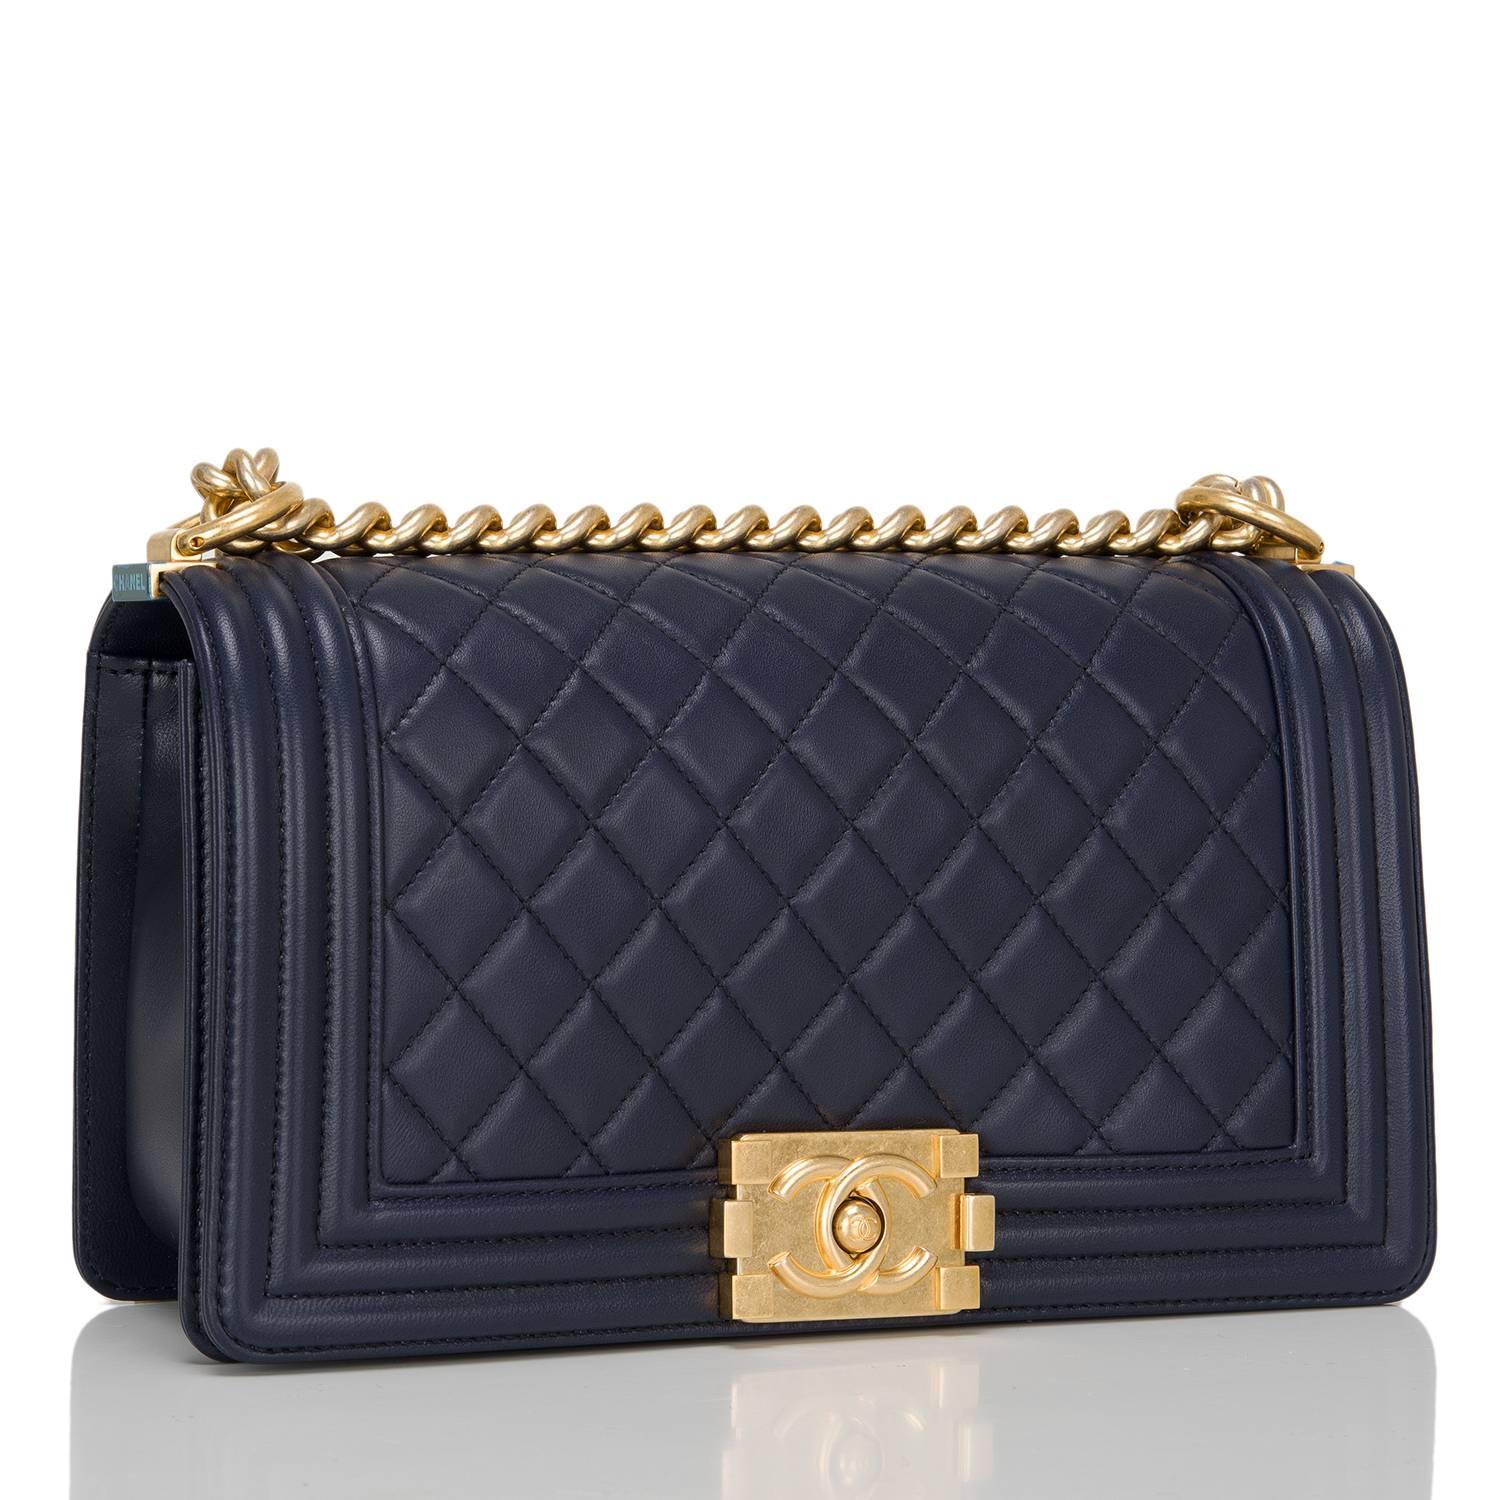 Chanel navy quilted calfskin Medium Boy Bag with aged gold tone hardware.

This Chanel bag features a full front flap with the Boy Chanel signature CC push lock closure and aged gold tone chain link and navy leather padded shoulder/crossbody